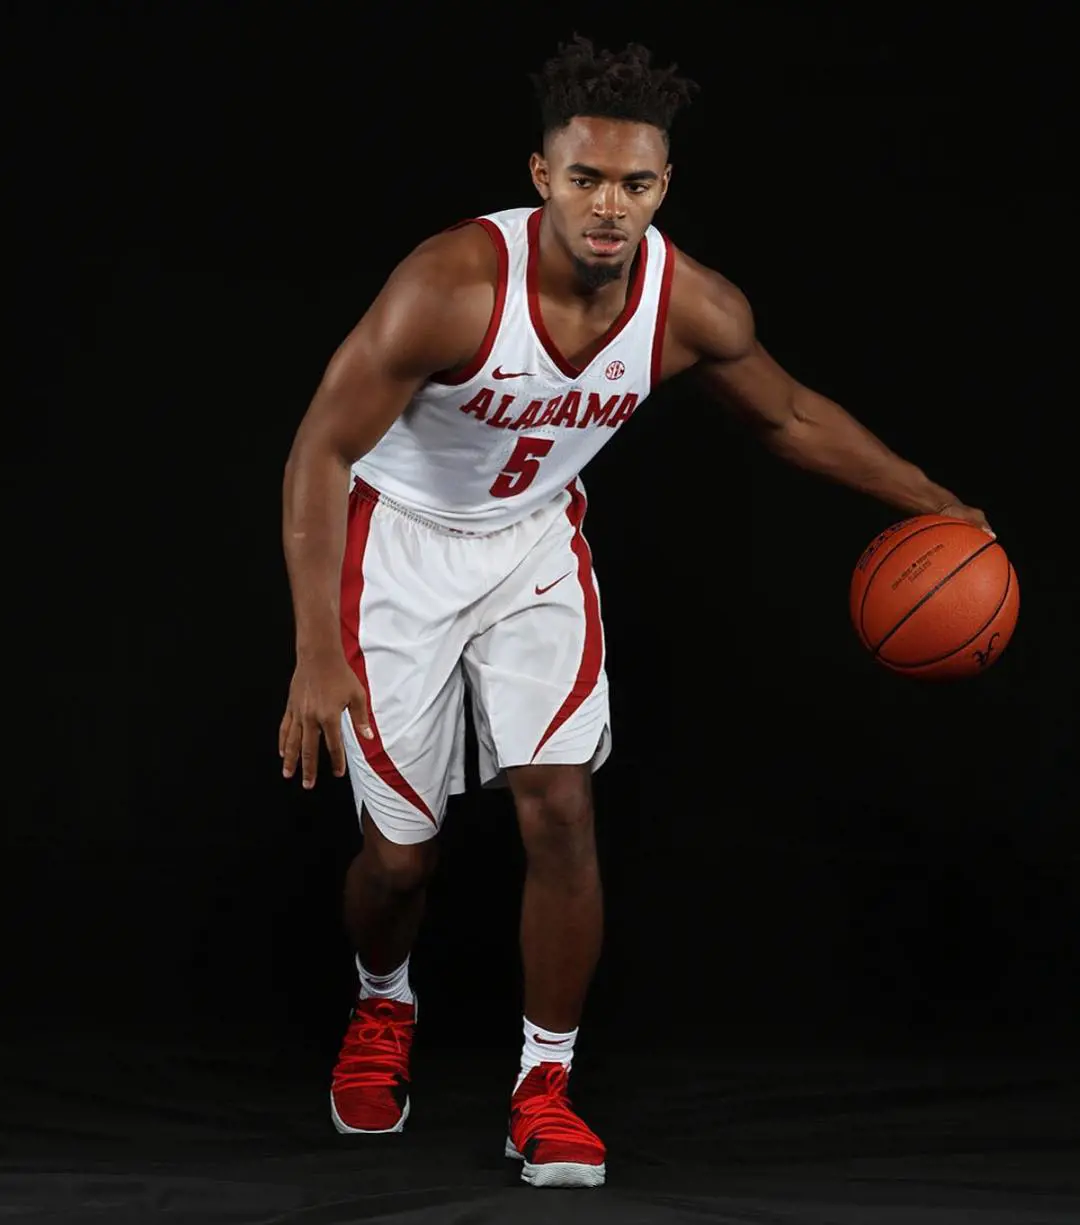 Avery II photoshoot while playing for the University of Alabama in August 2018